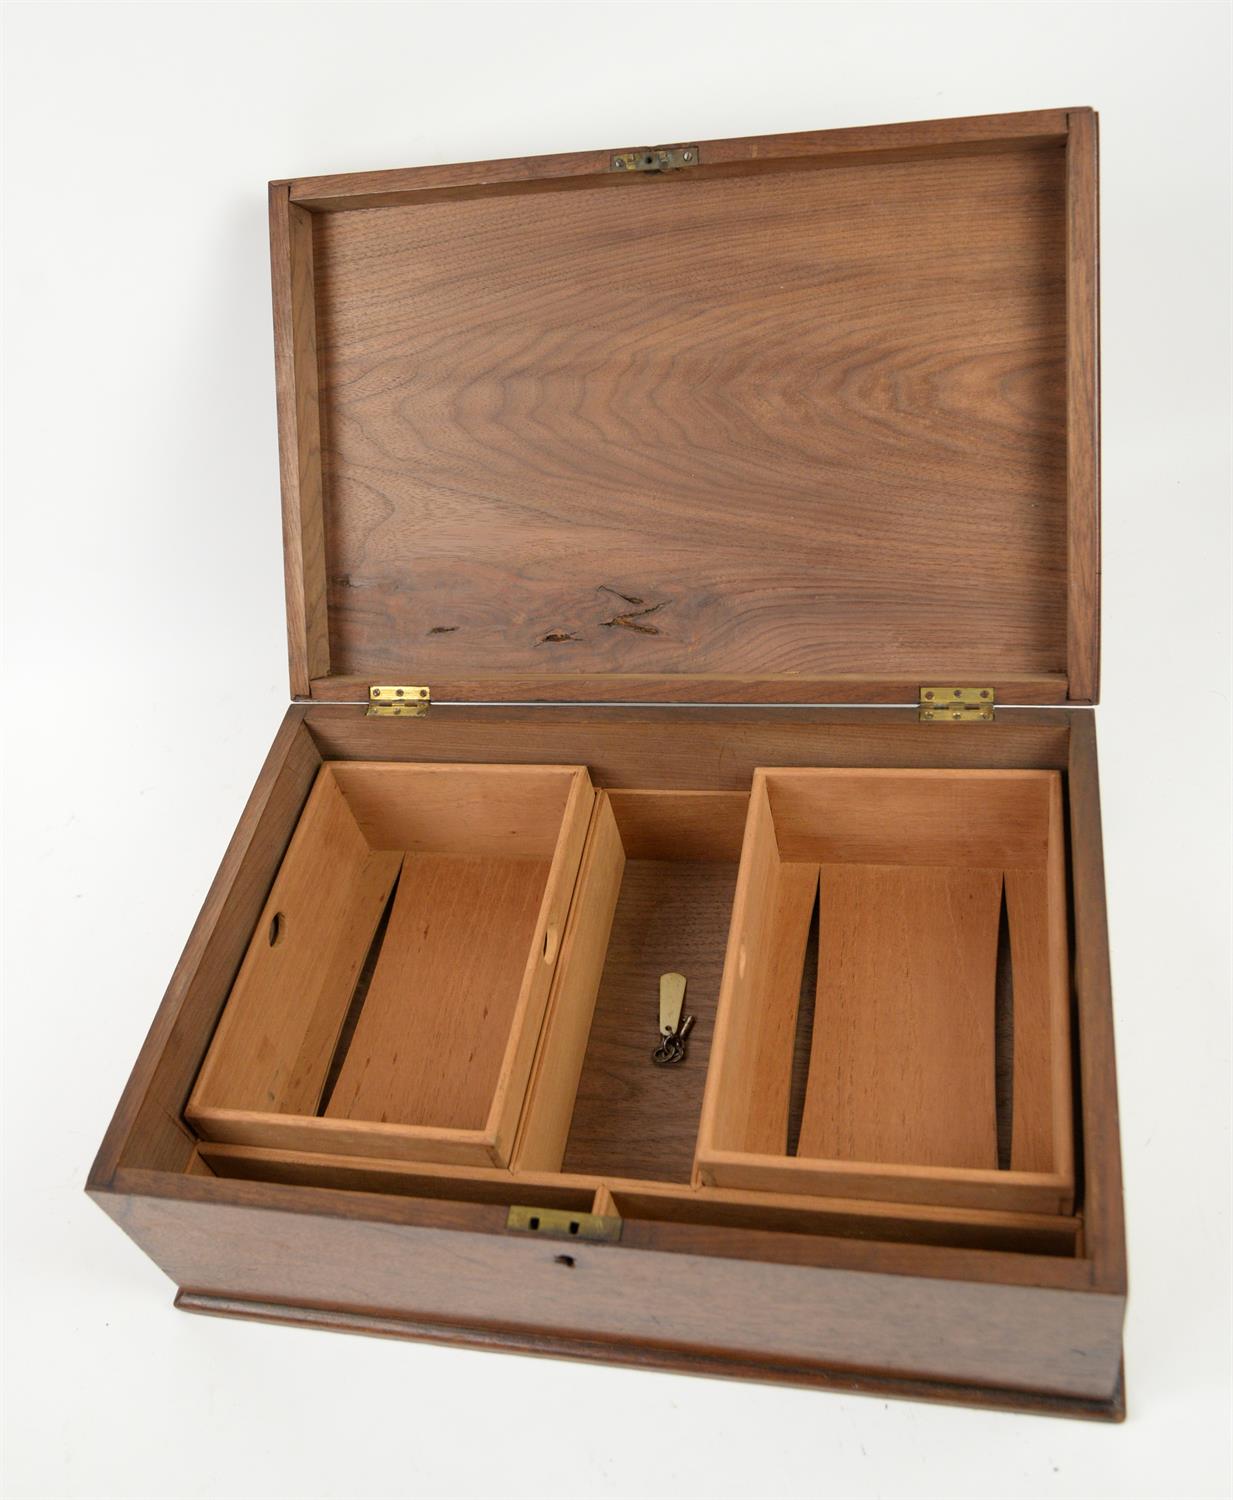 Early 20th century camphor wood humidor with fitted interior, h18cm x w47cm x d31cm, - Image 2 of 2